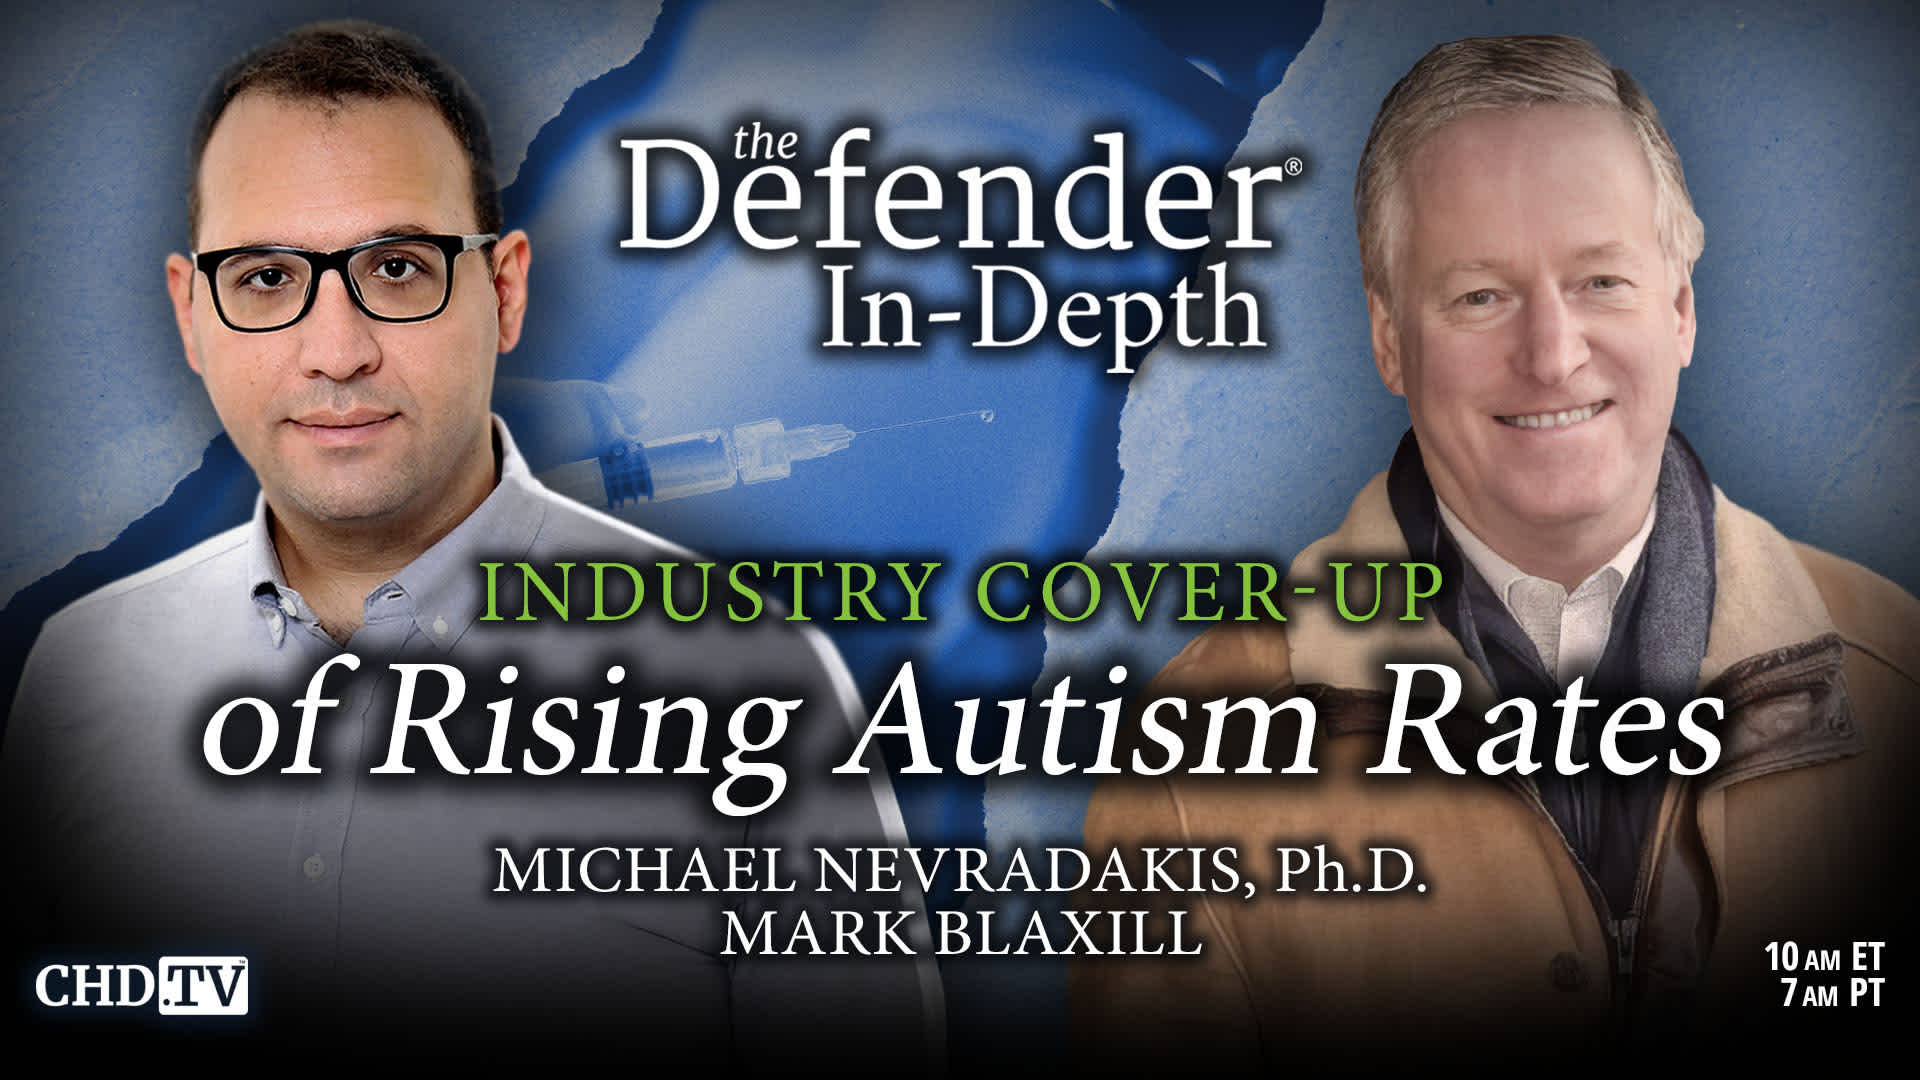 Industry Cover-Up of Rising Autism Rates